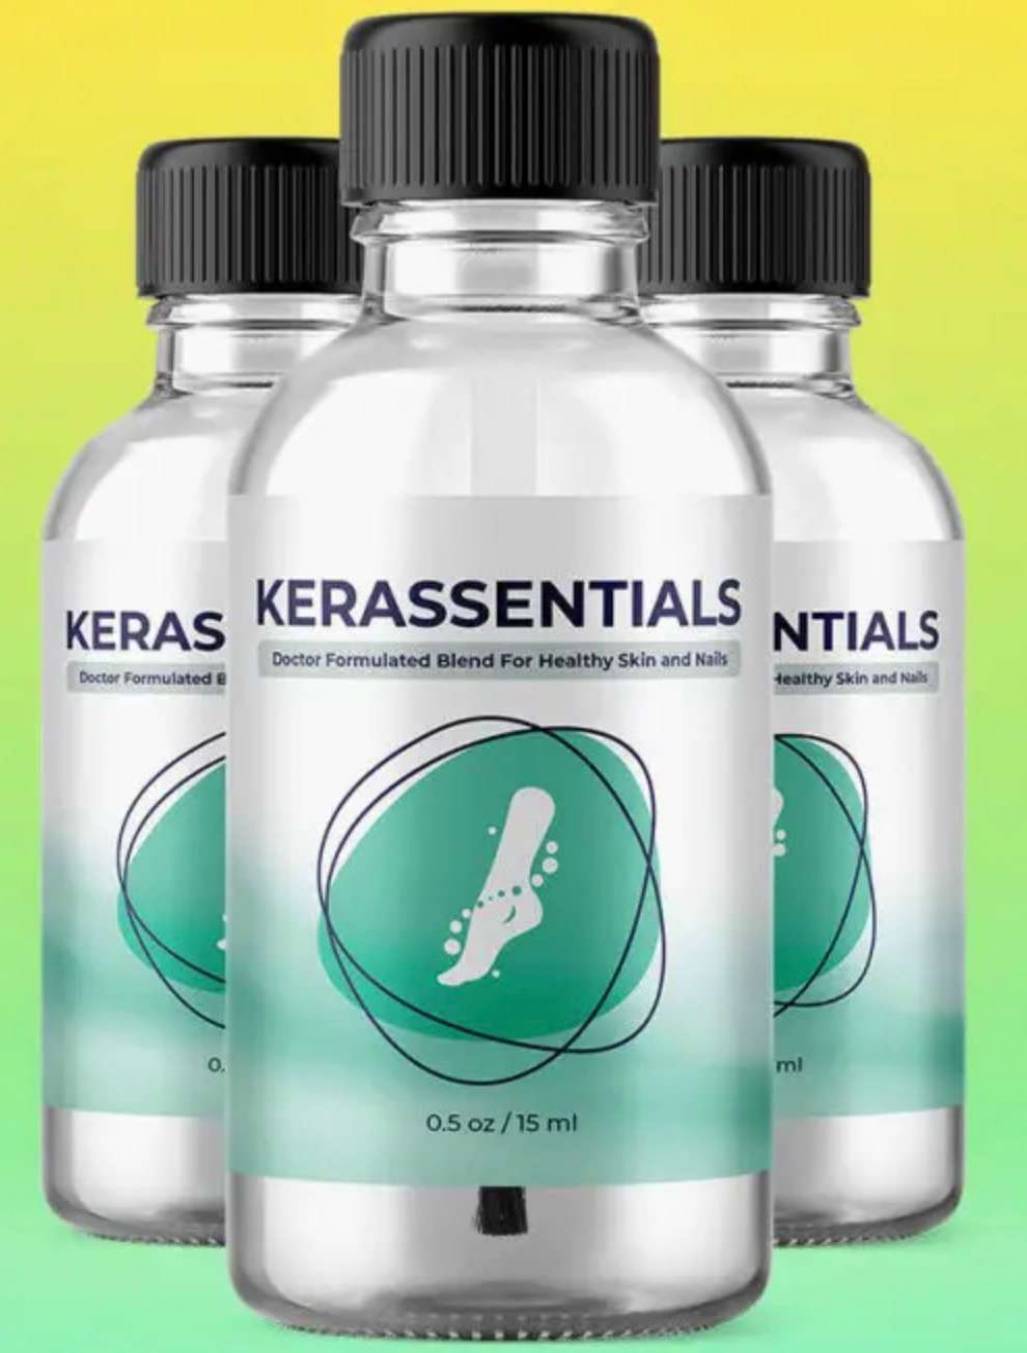 Cheapest Place To Buy Kerassentials